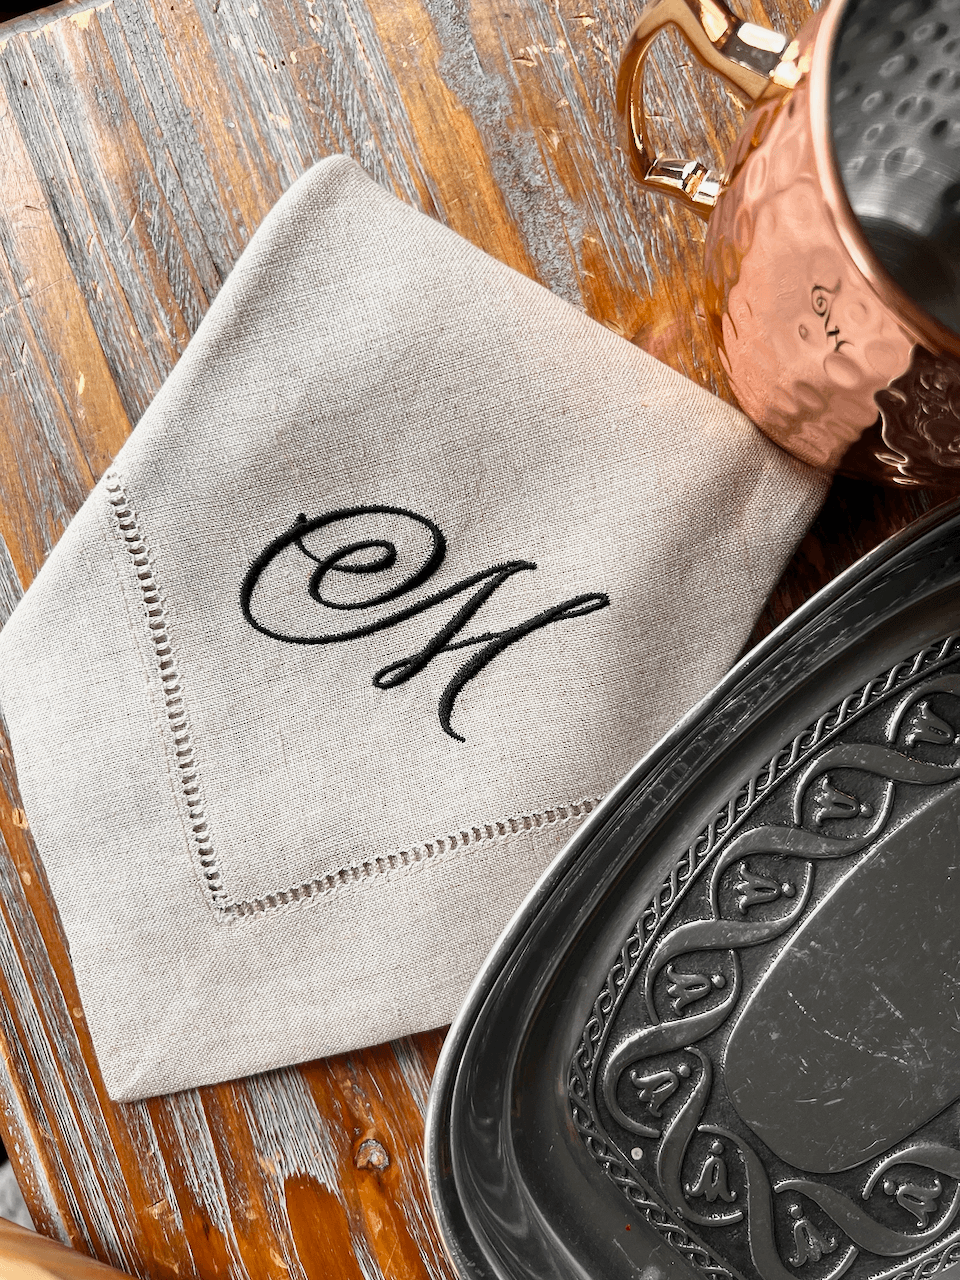 Scallop Monogrammed Cloth Dinner Napkins - Set of 4 napkins – White Tulip  Embroidery